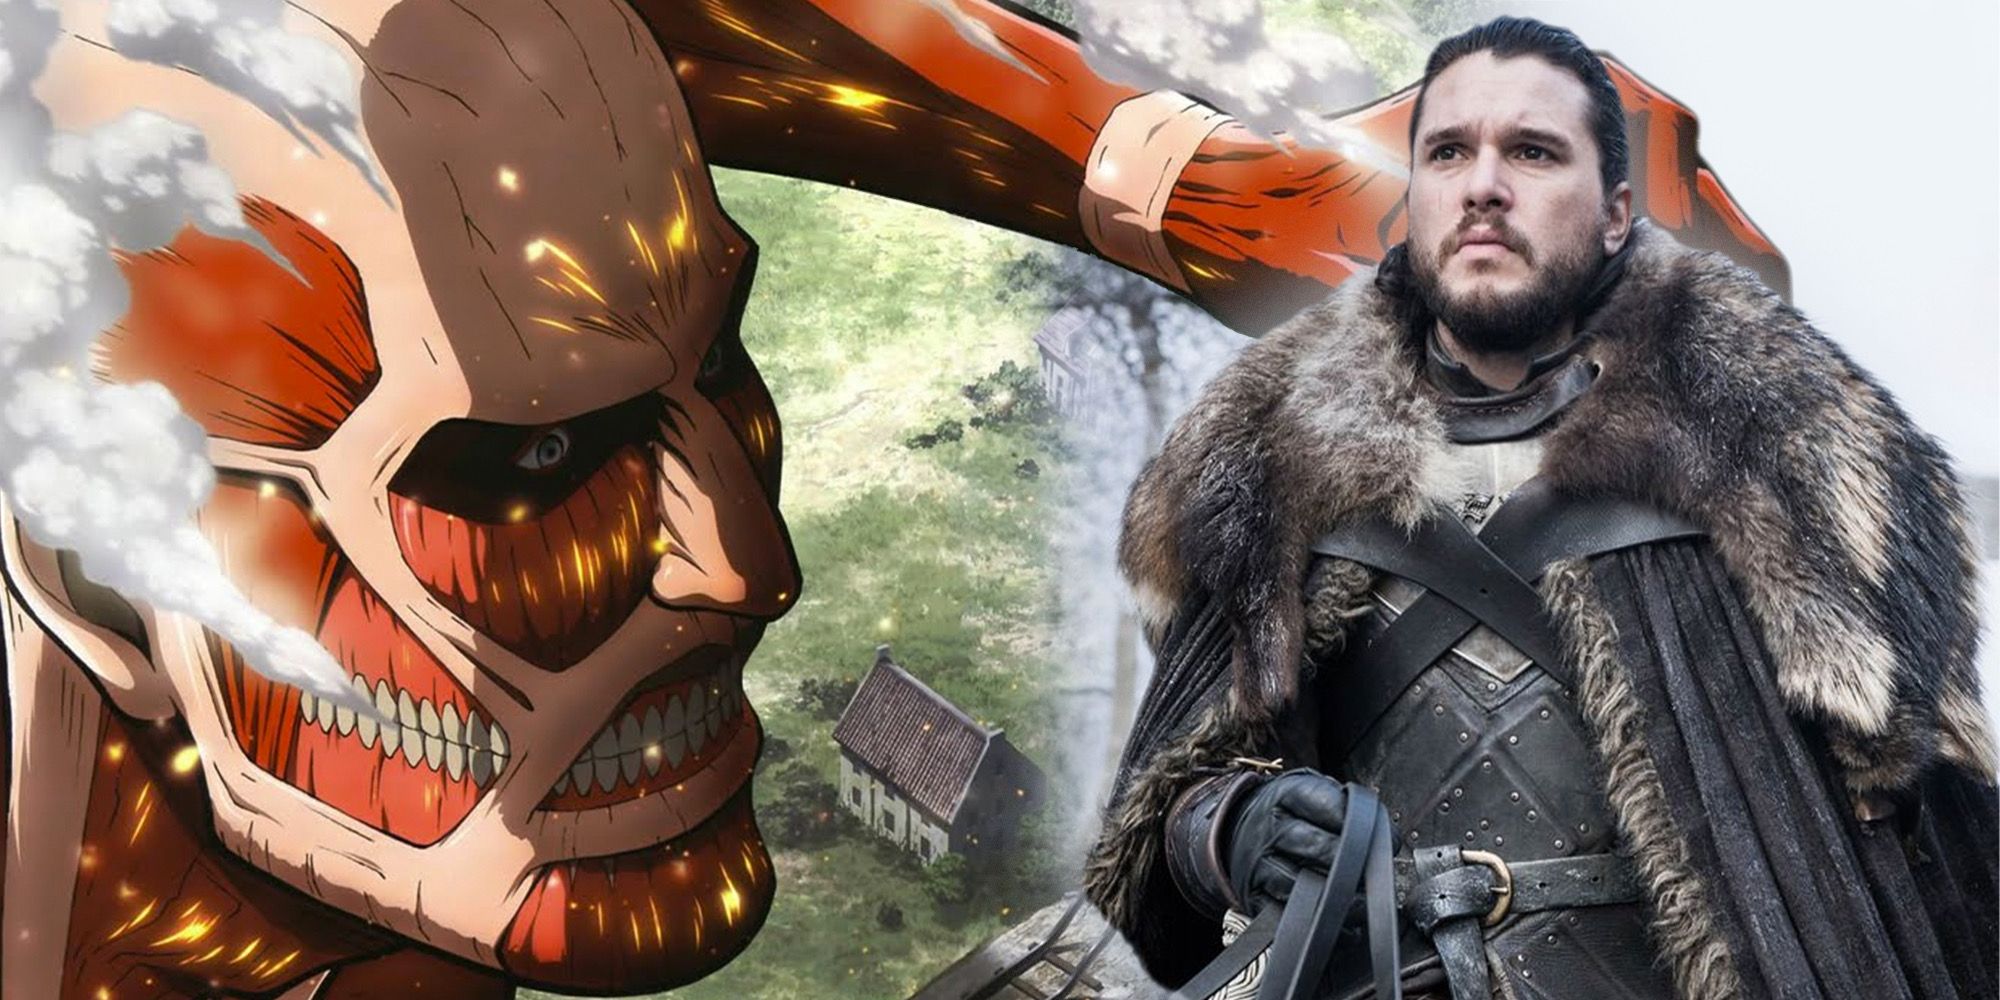 Attack On Titan Vs Game Of Thrones Which Show Is Better